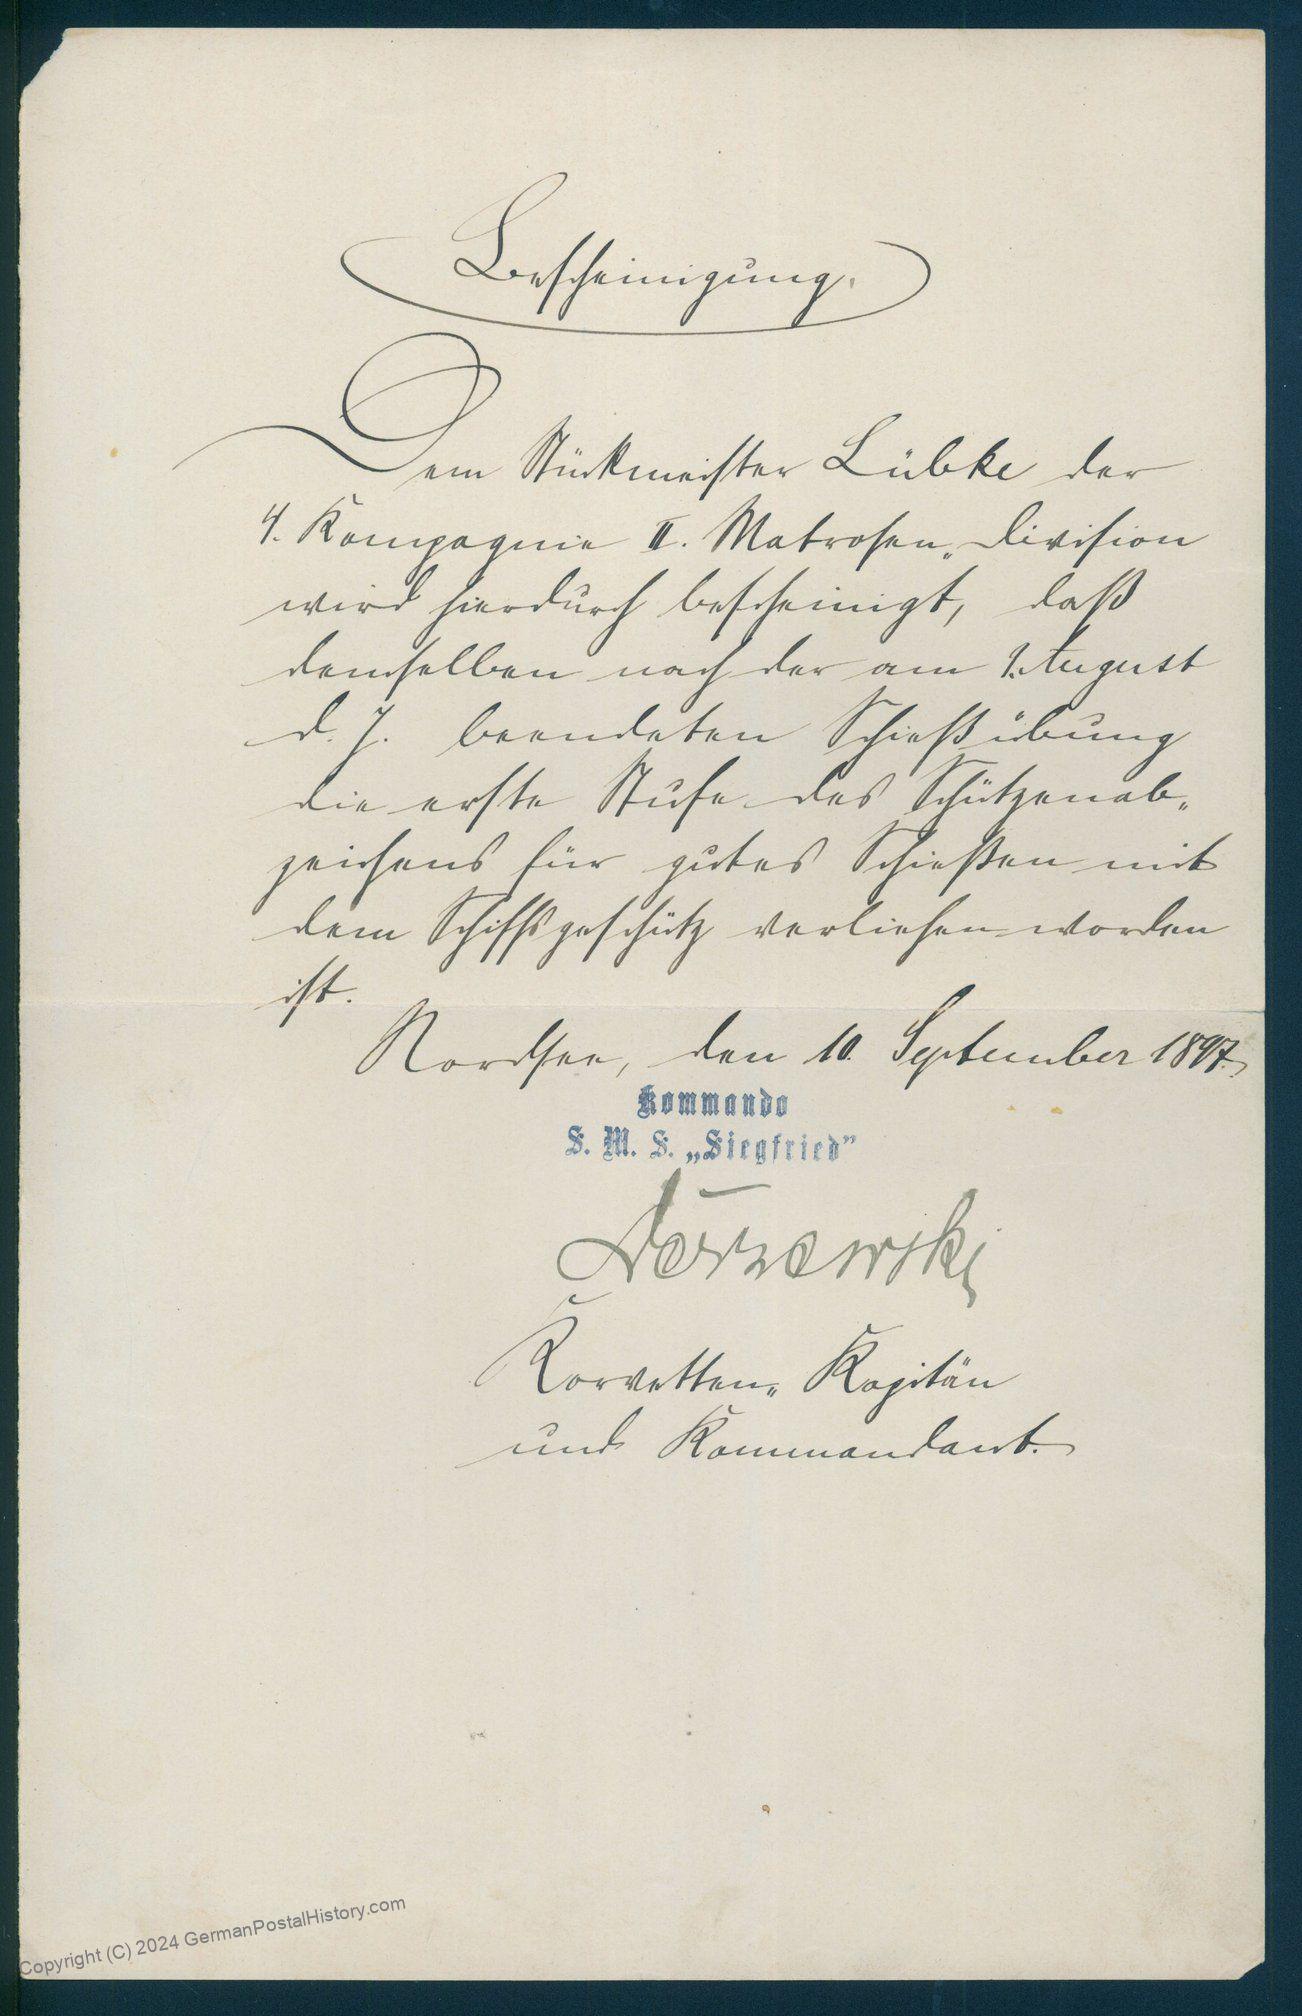 Germany 1897 SMS Siegfried North Sea Navy Commander Signed Letter 93044 Super promocyjna cena tanio